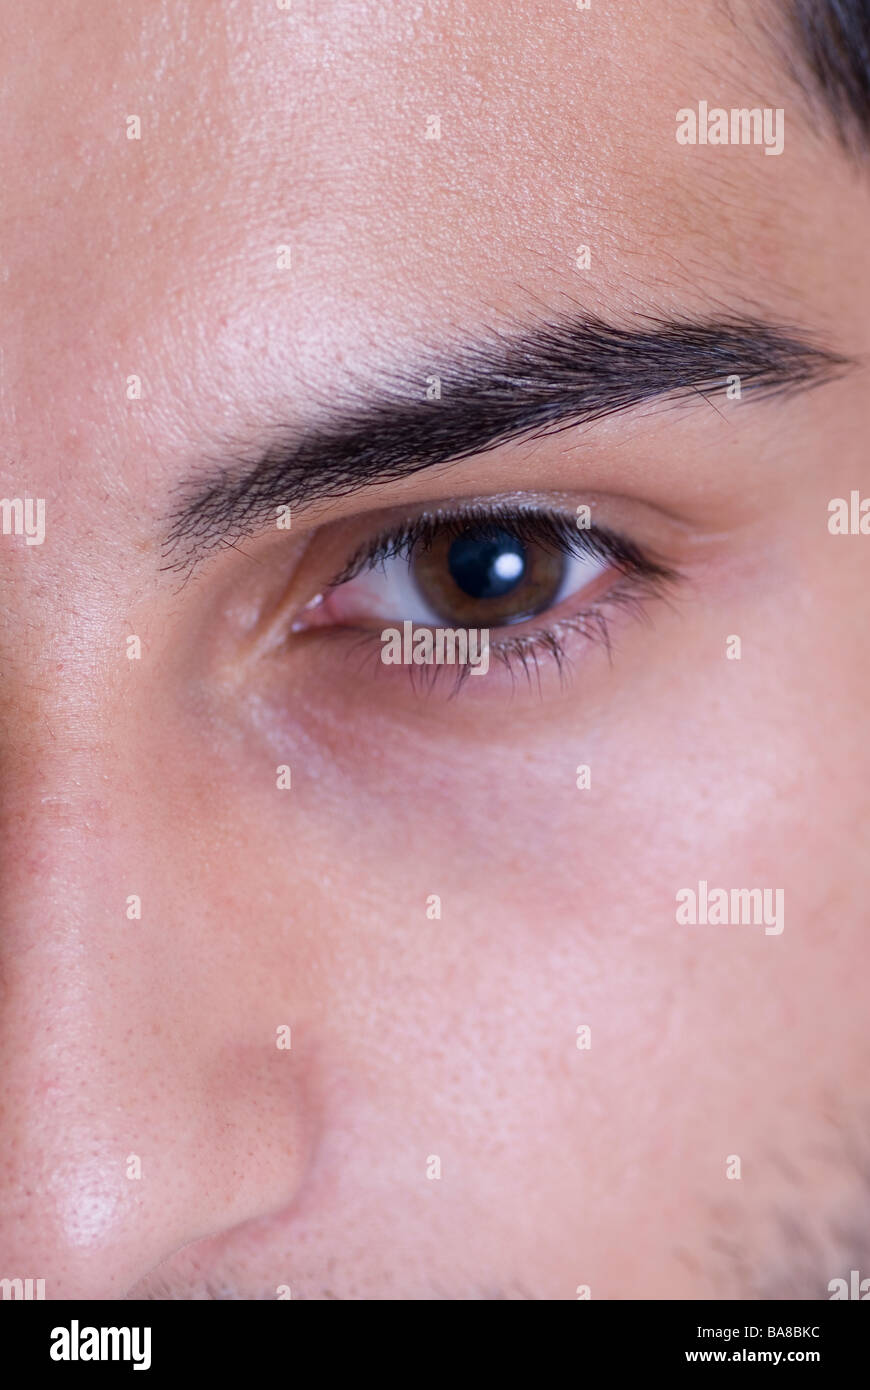 Close up of an ethnic man's eye Stock Photo